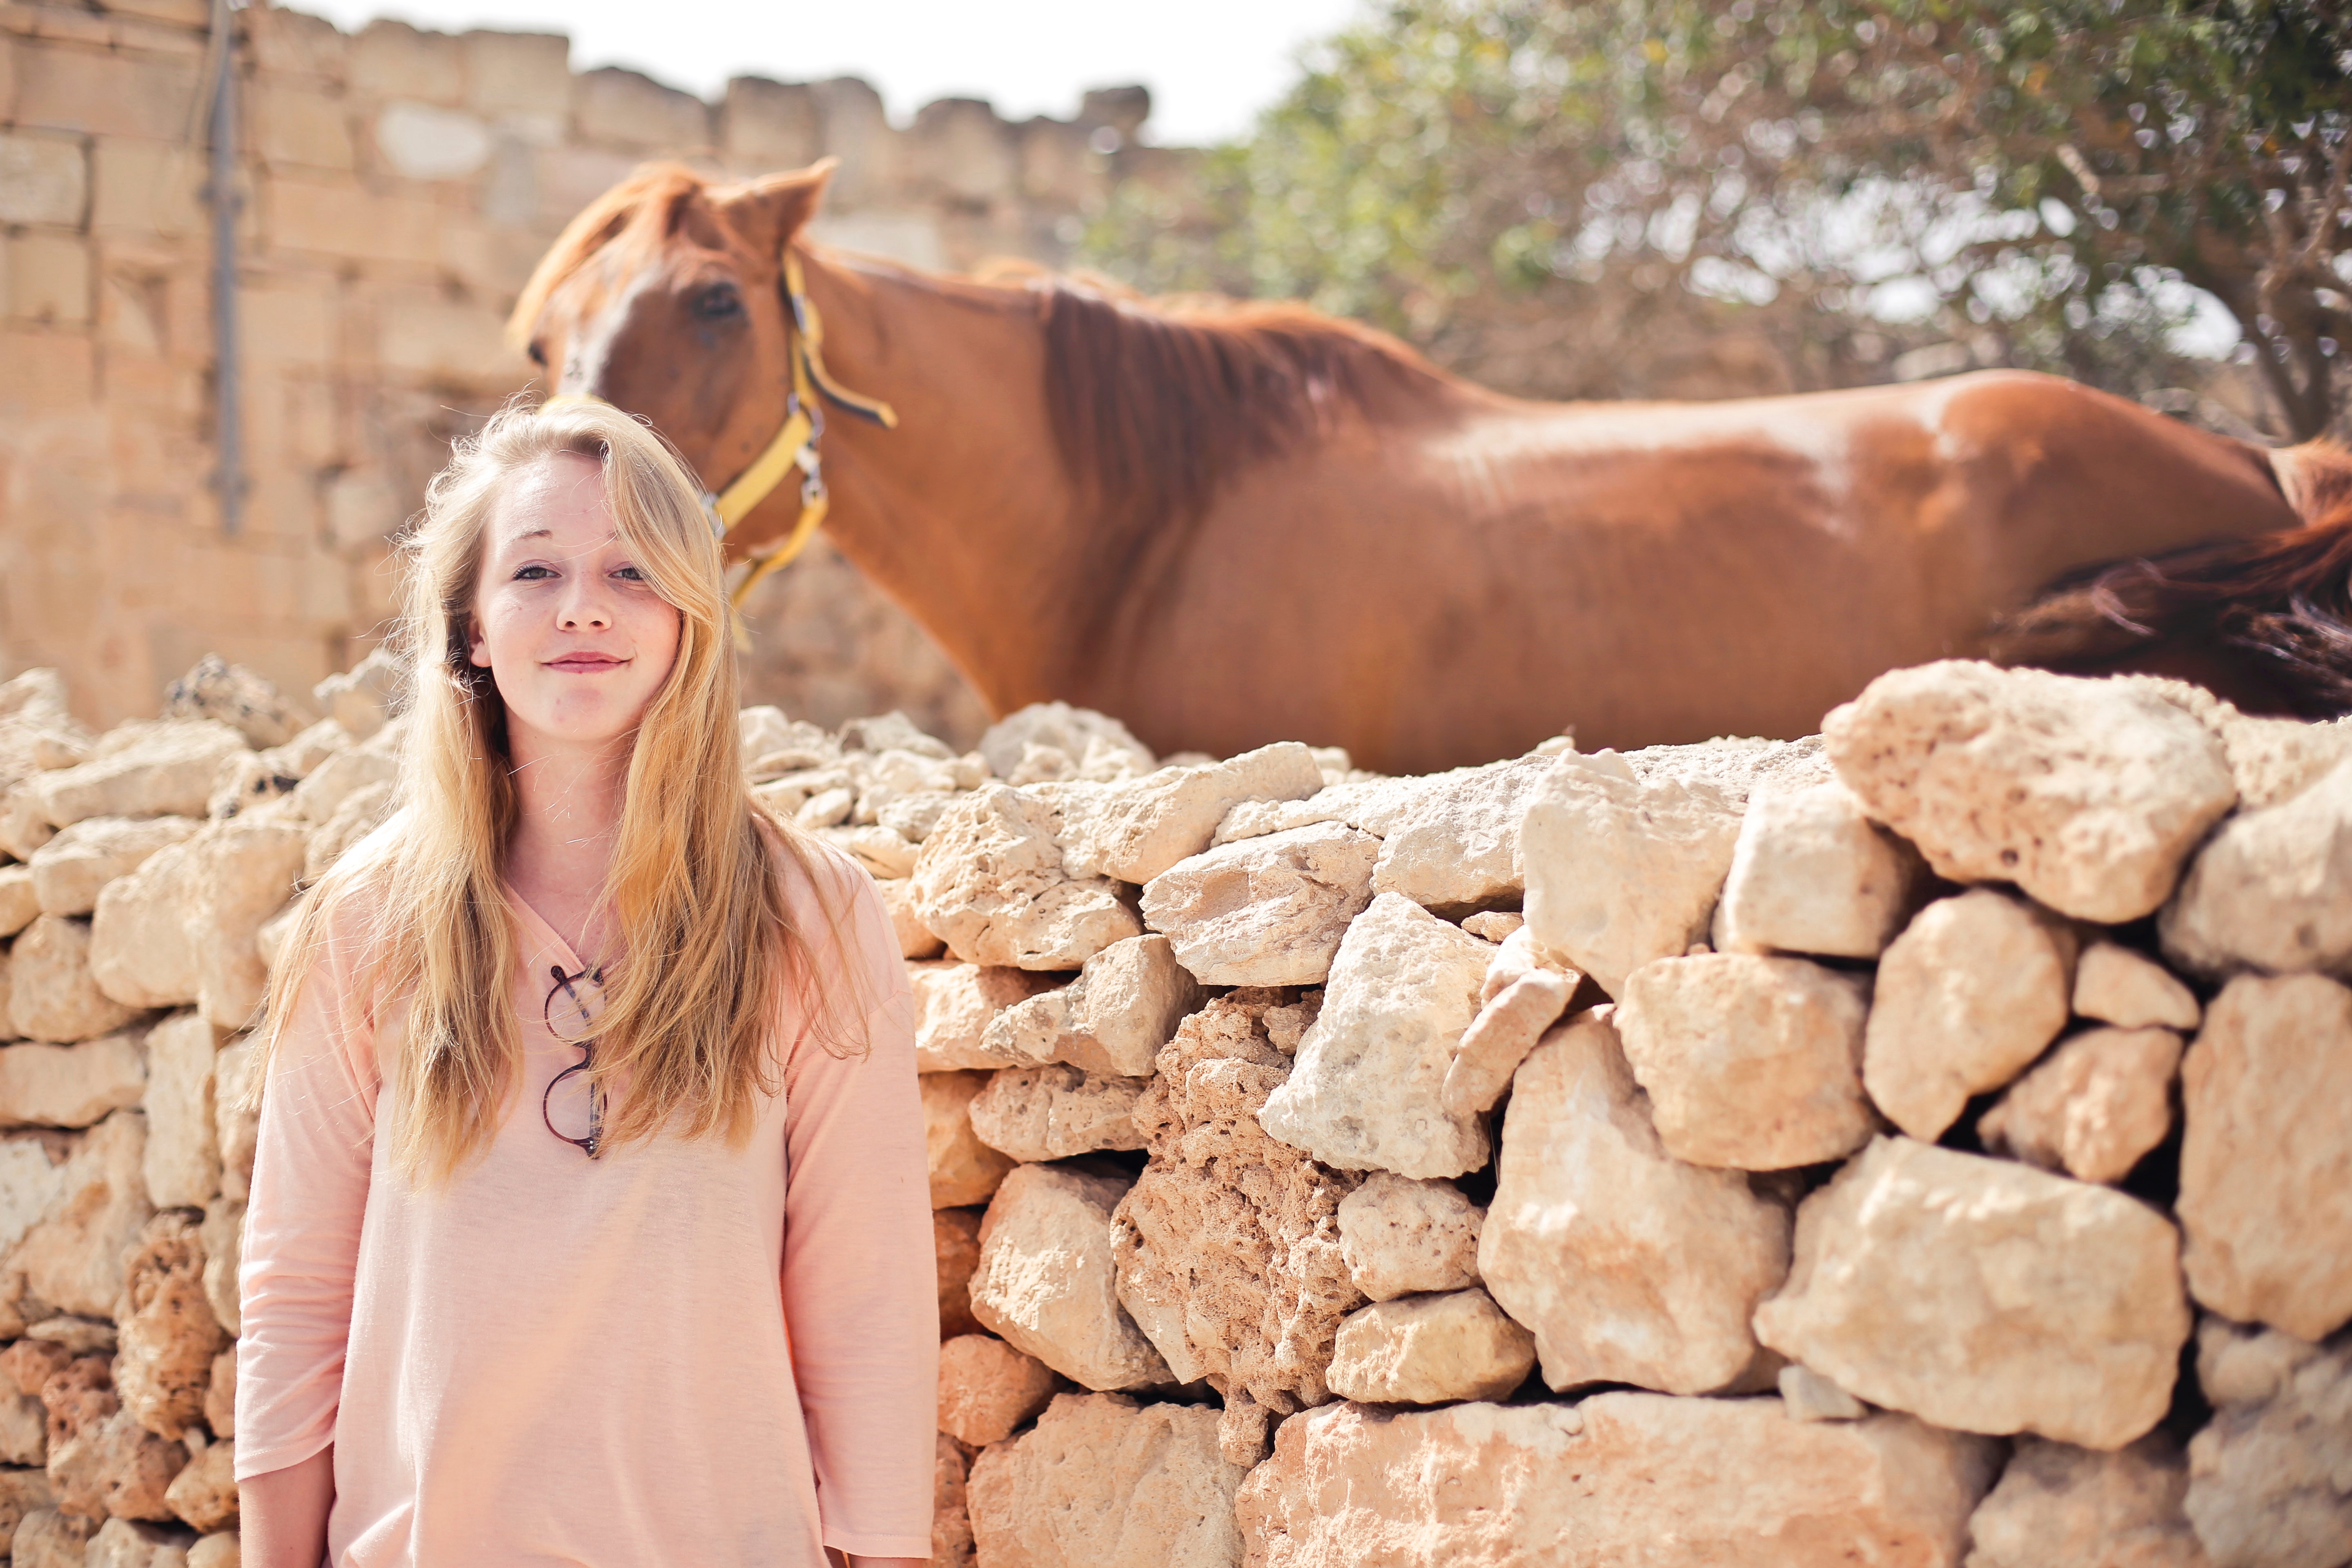 Woman Wearing Pink V-neck 3/4 Sleeved Shirt With Eyeglasses Standing in Front of Brown Horse, Rocks, Young, Woman, White, HQ Photo